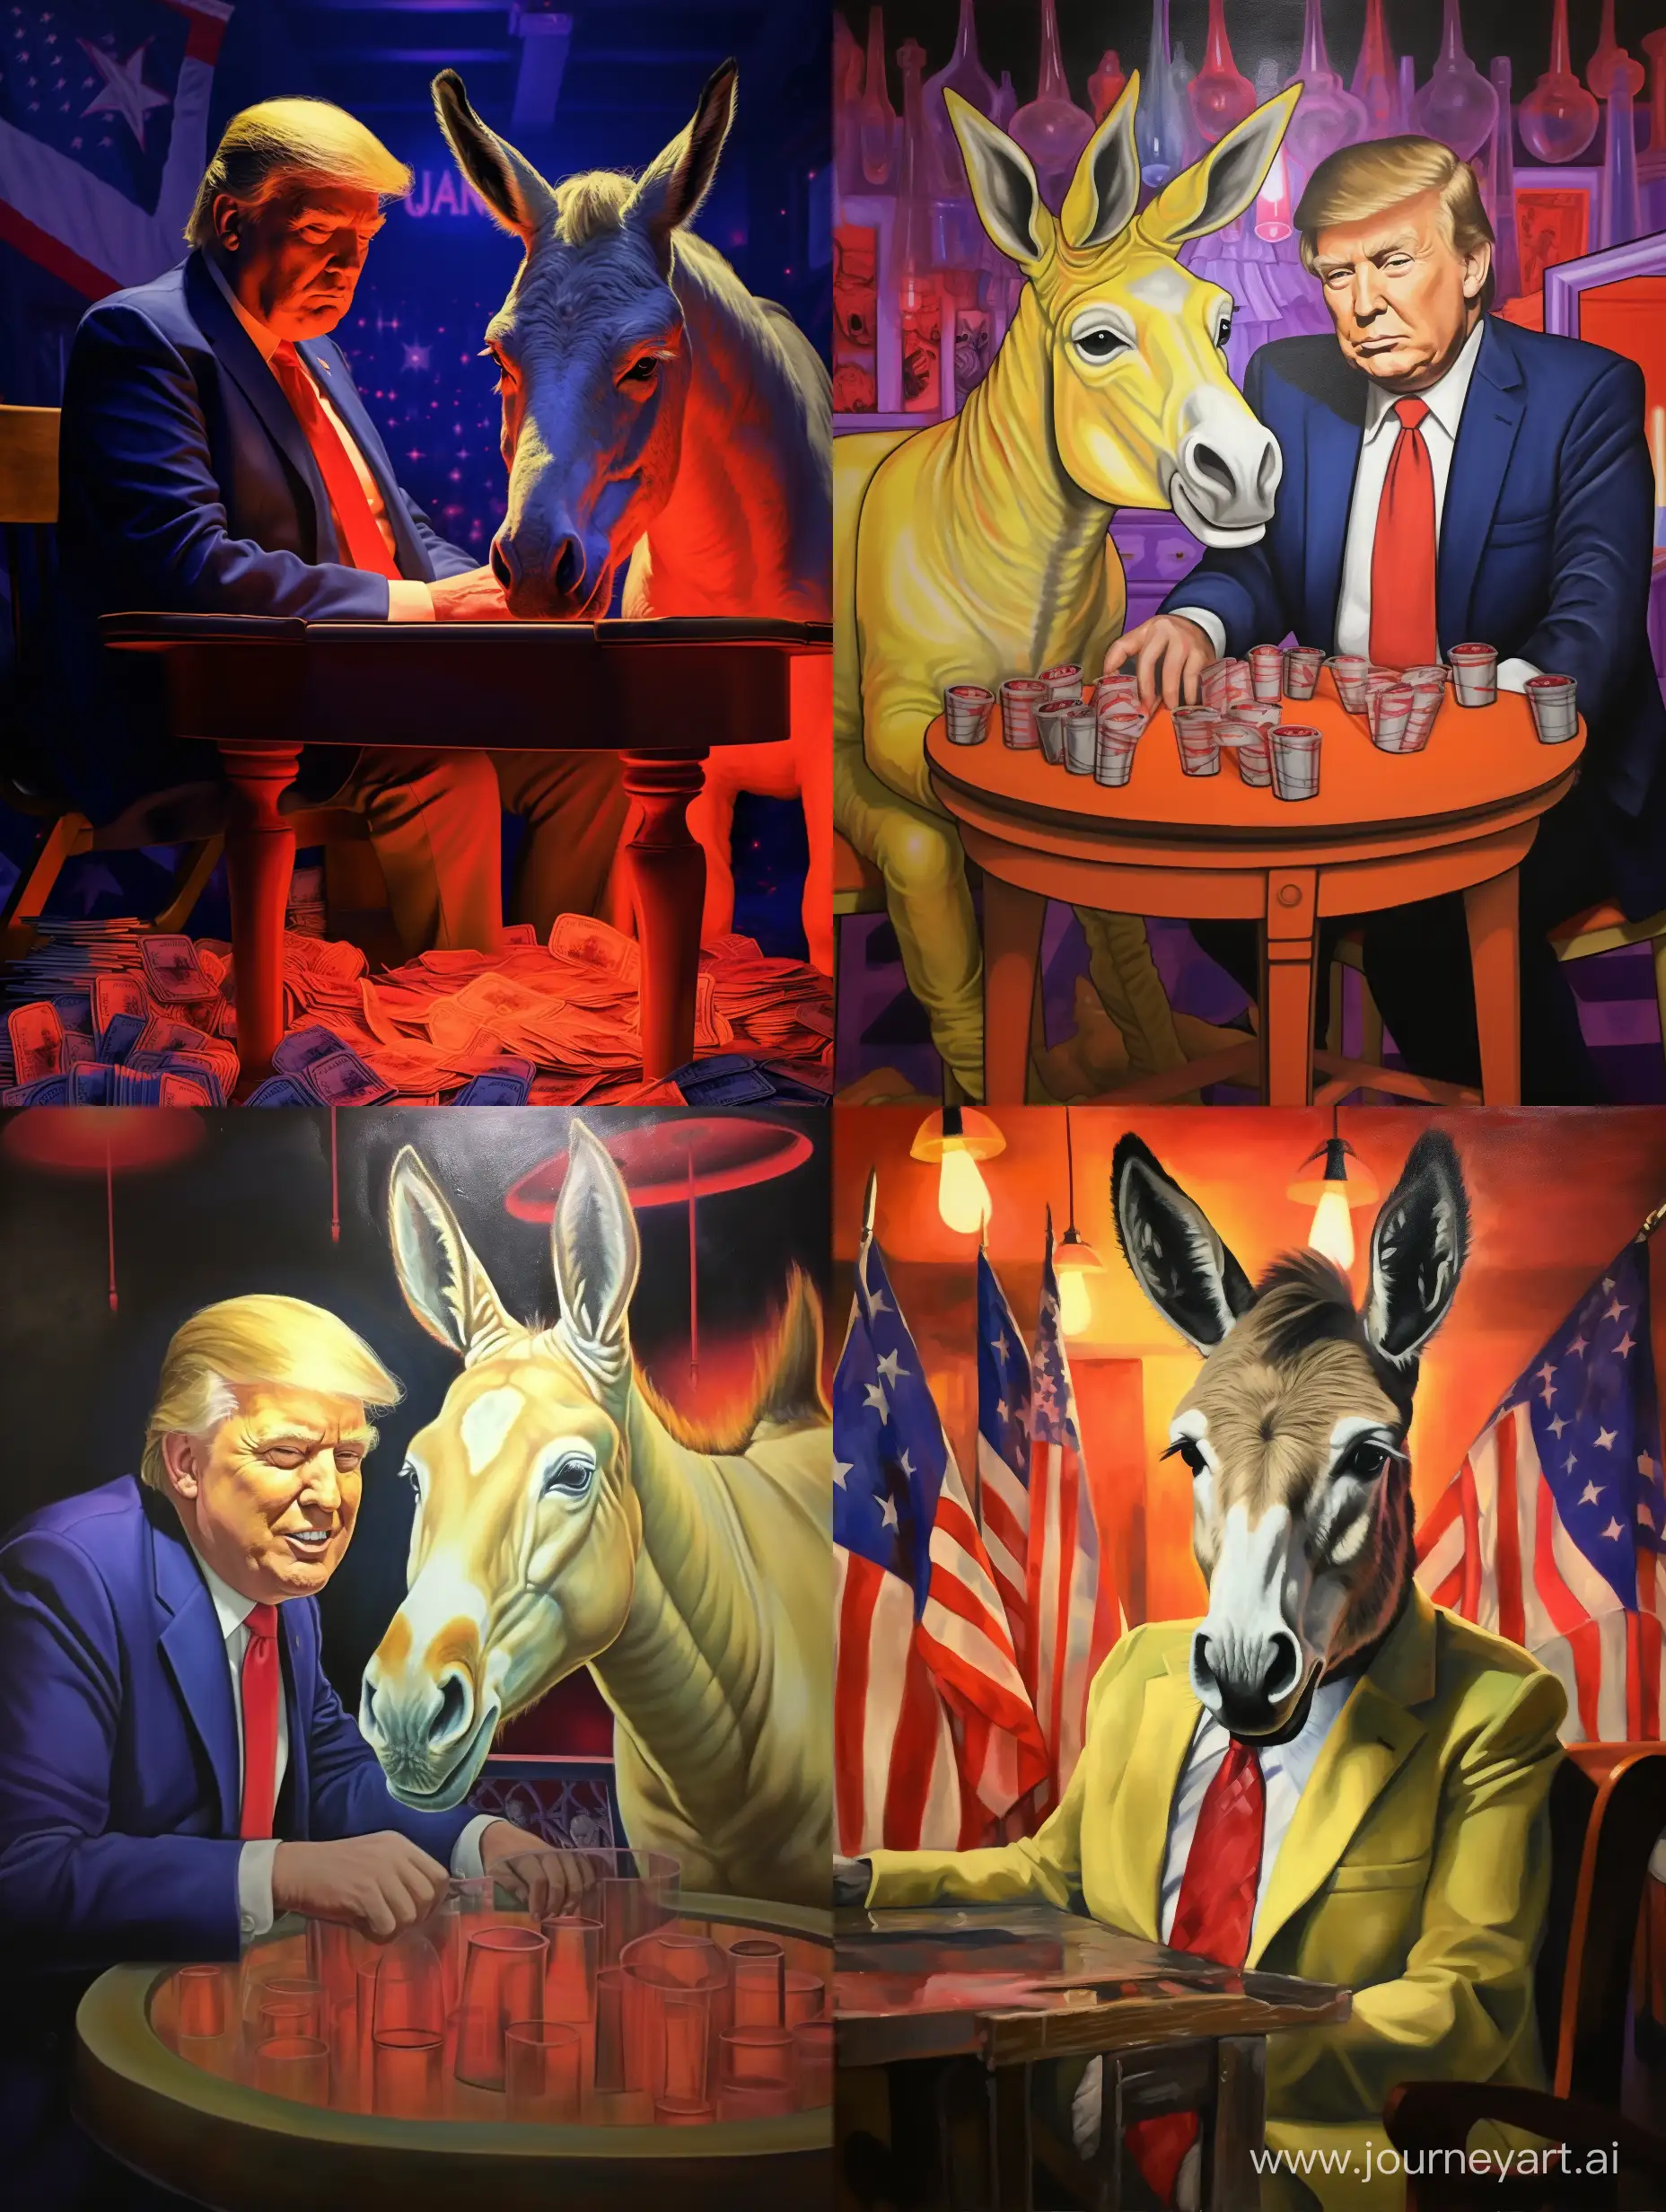 A casino where everything is very bright and glows, on the poker table there is a donkey with skin the color of the American flag and Donald Trump is sitting on this donkey